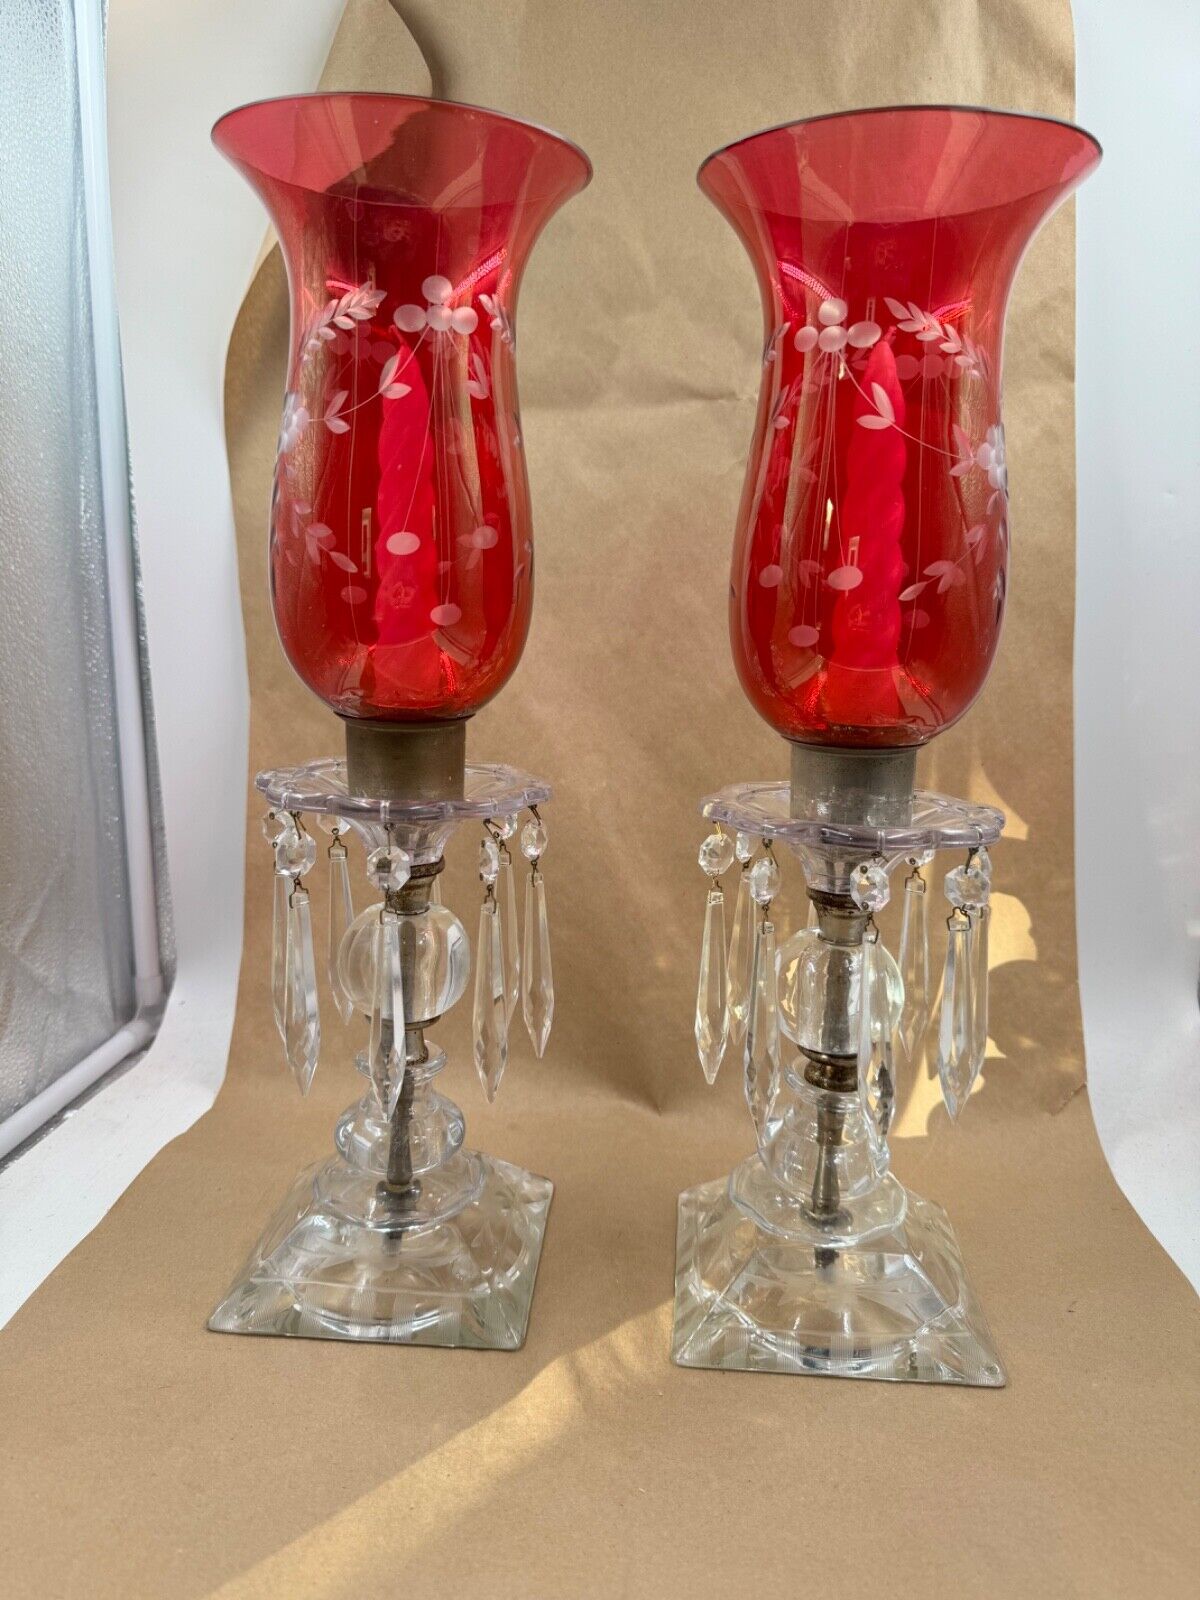 Pair of Etched Cranberry Hurricane Mantle Candle Holders